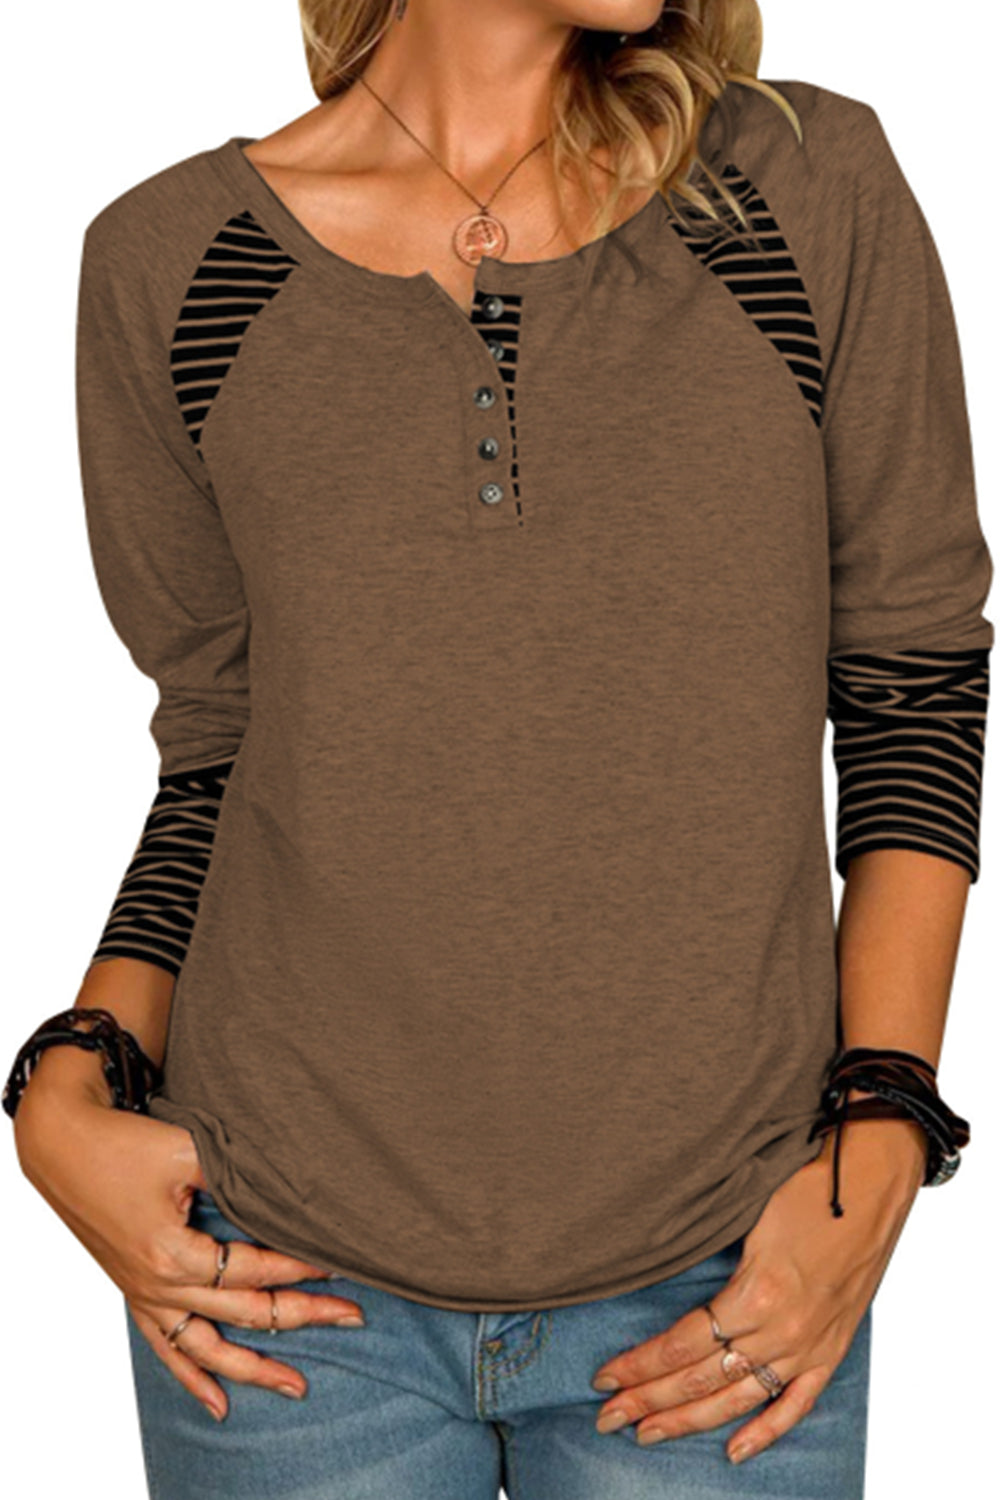 Women's Long Sleeve Printed Striped Casual T-Shirt Top